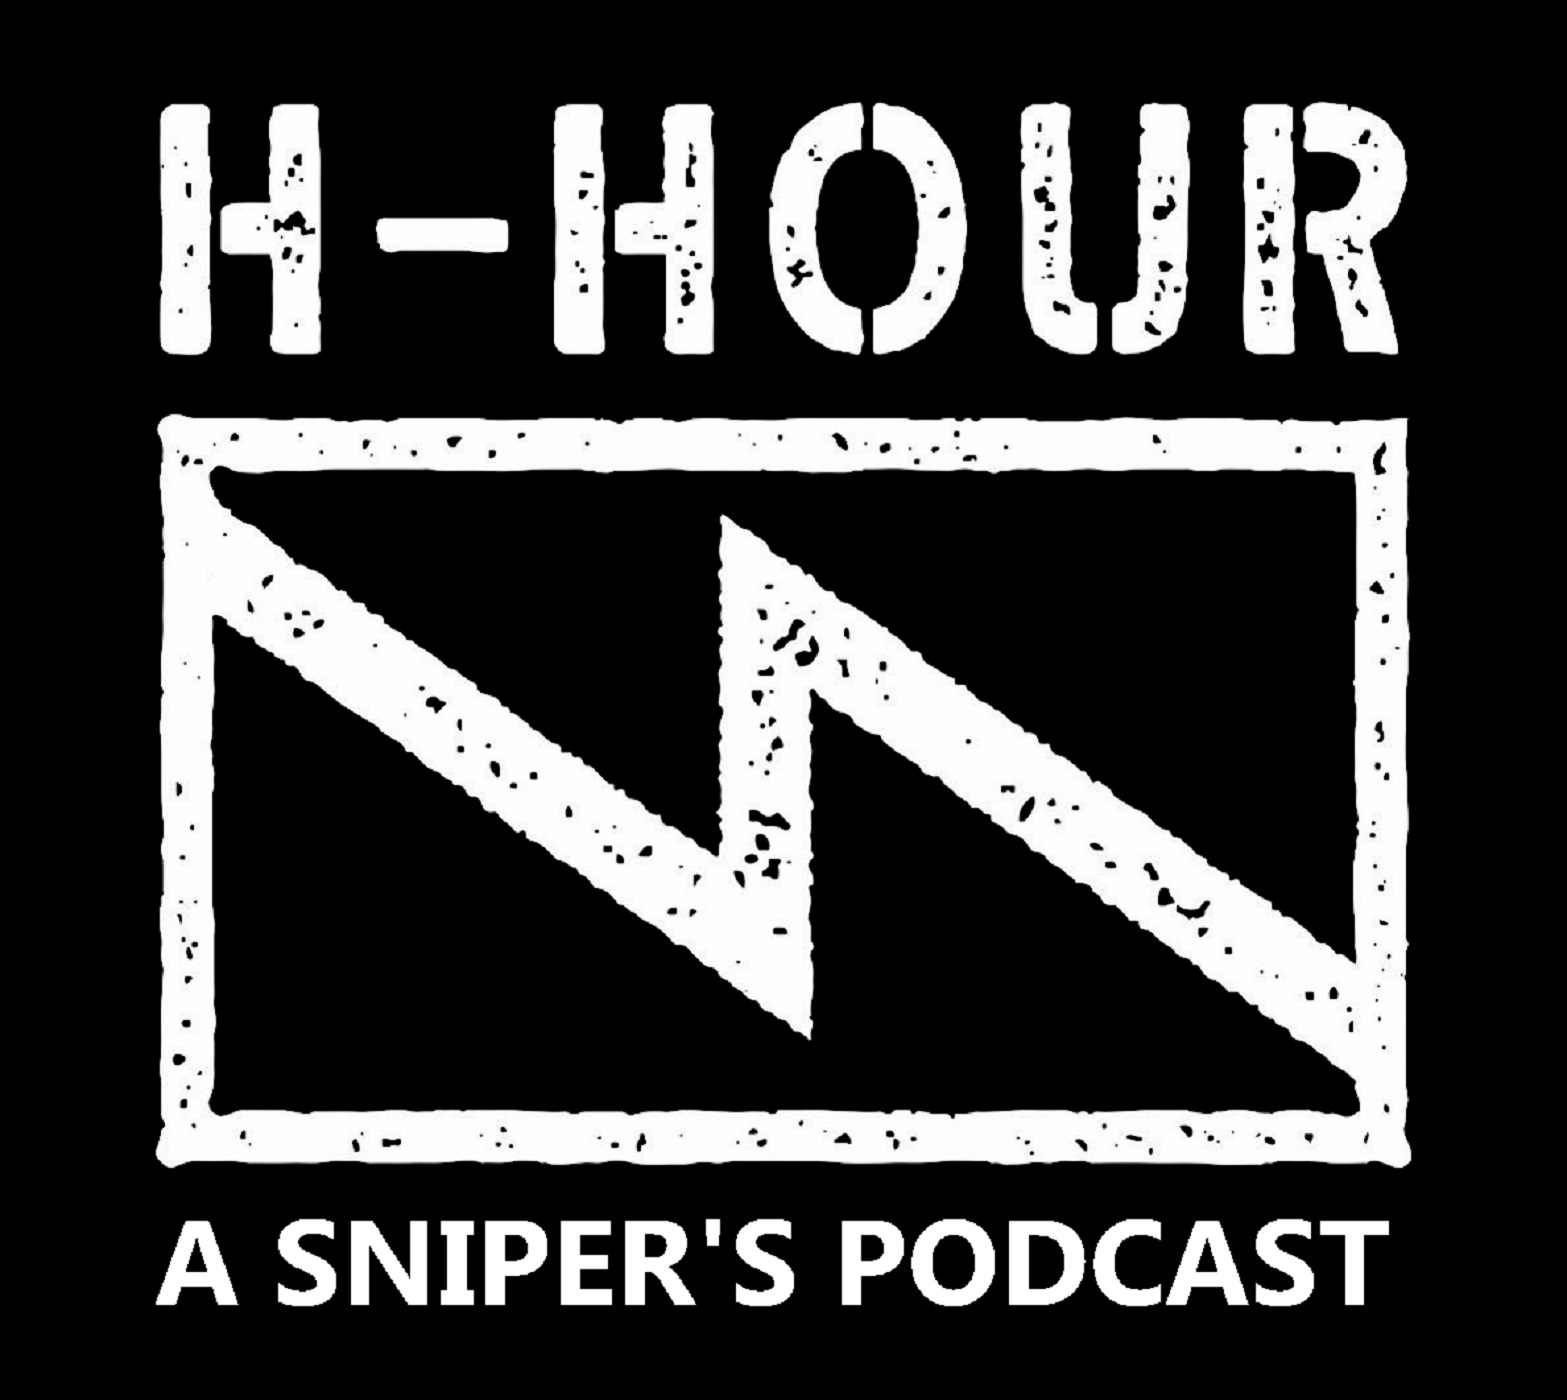 A highlight from H-Hour Podcast #143 Jonny Ball  British Army veteran, founder of Campaign Force